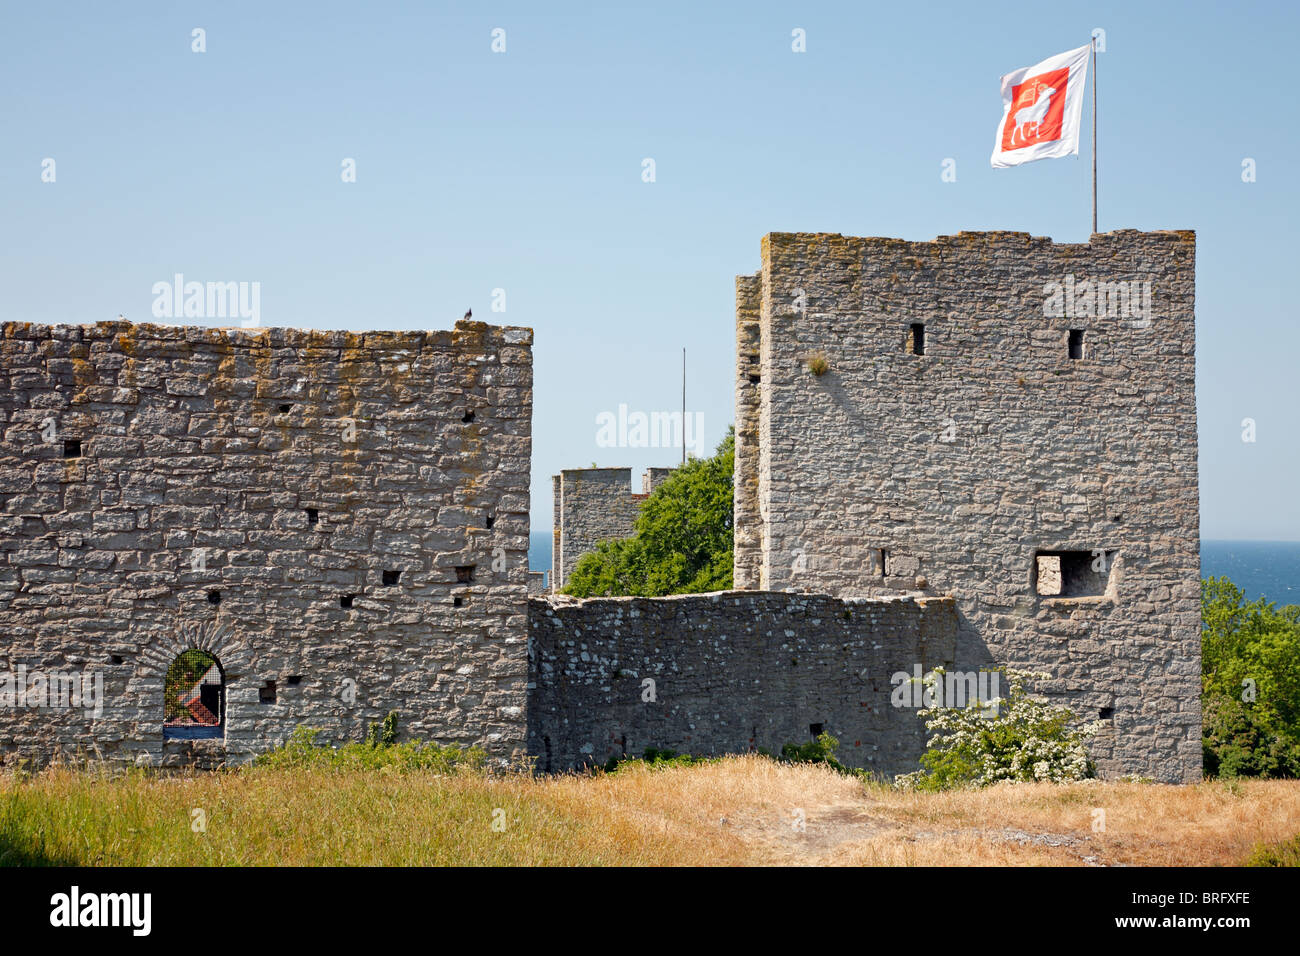 The northern part of the medieval ring wall, the city wall, around the Hanseatic city Visby on the Swedish island Gotland in the Baltic Sea Stock Photo